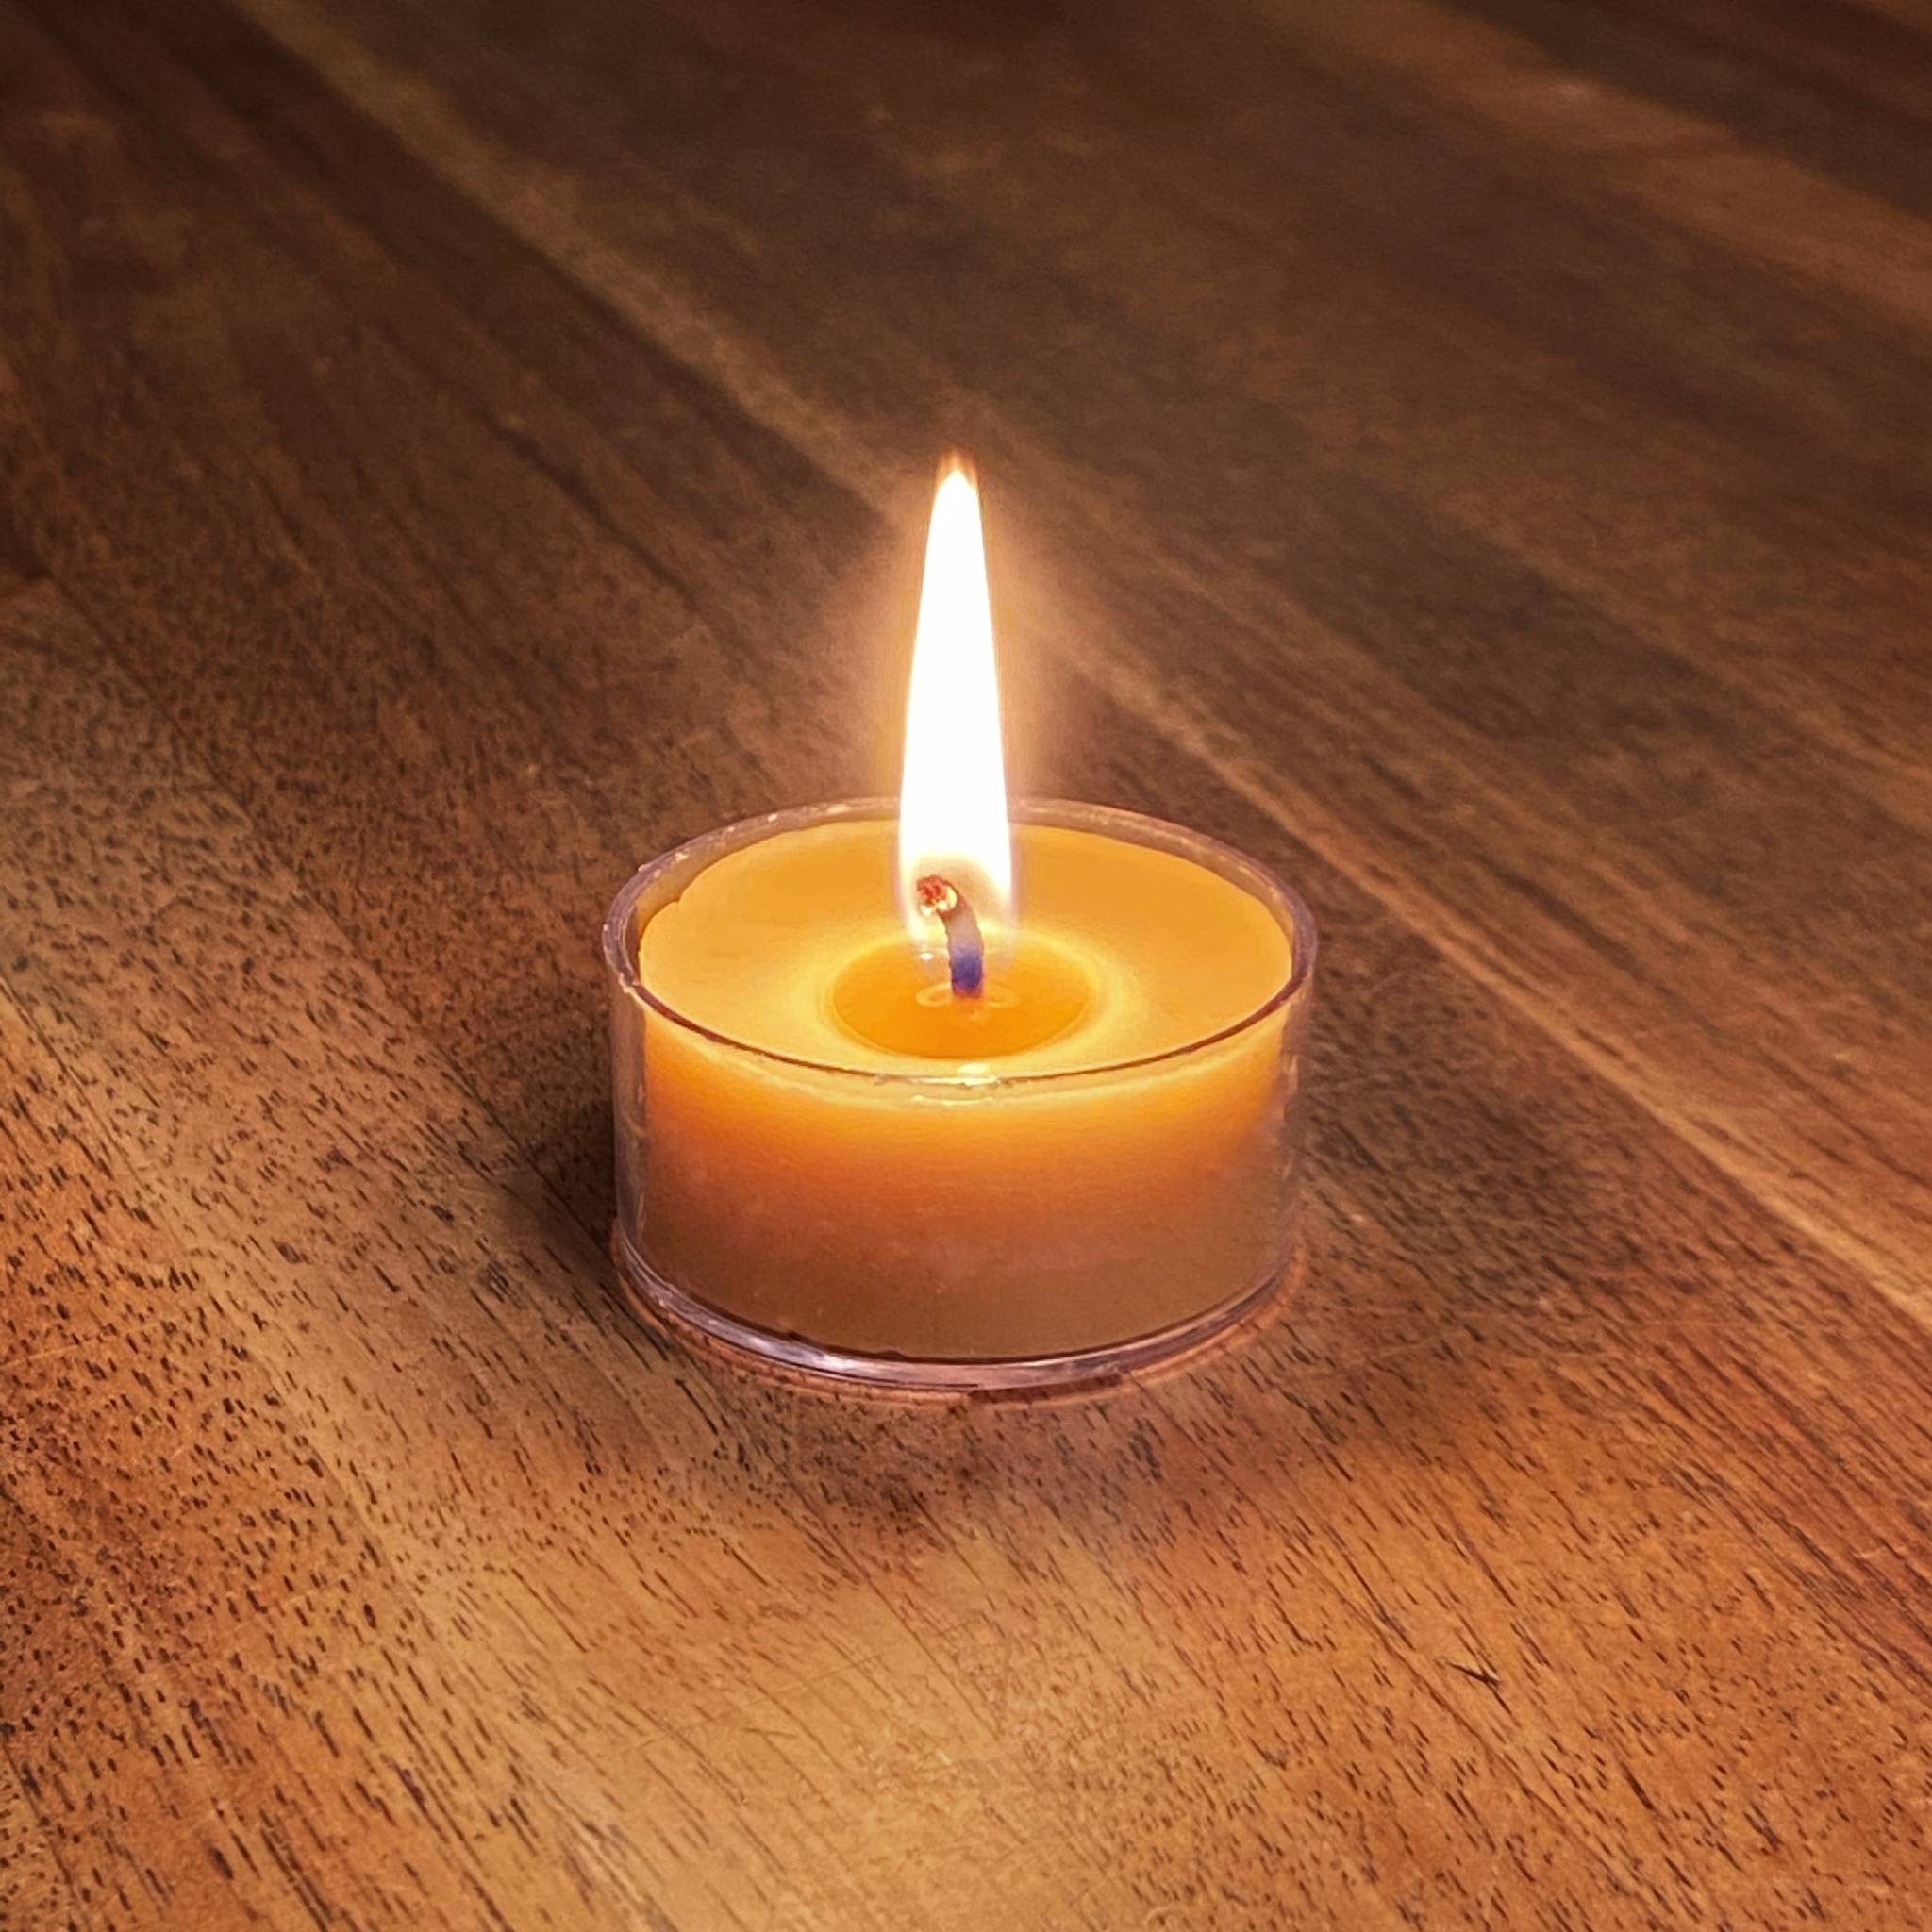 Beeswax tealight candle will burn for approximately 4-5 hours